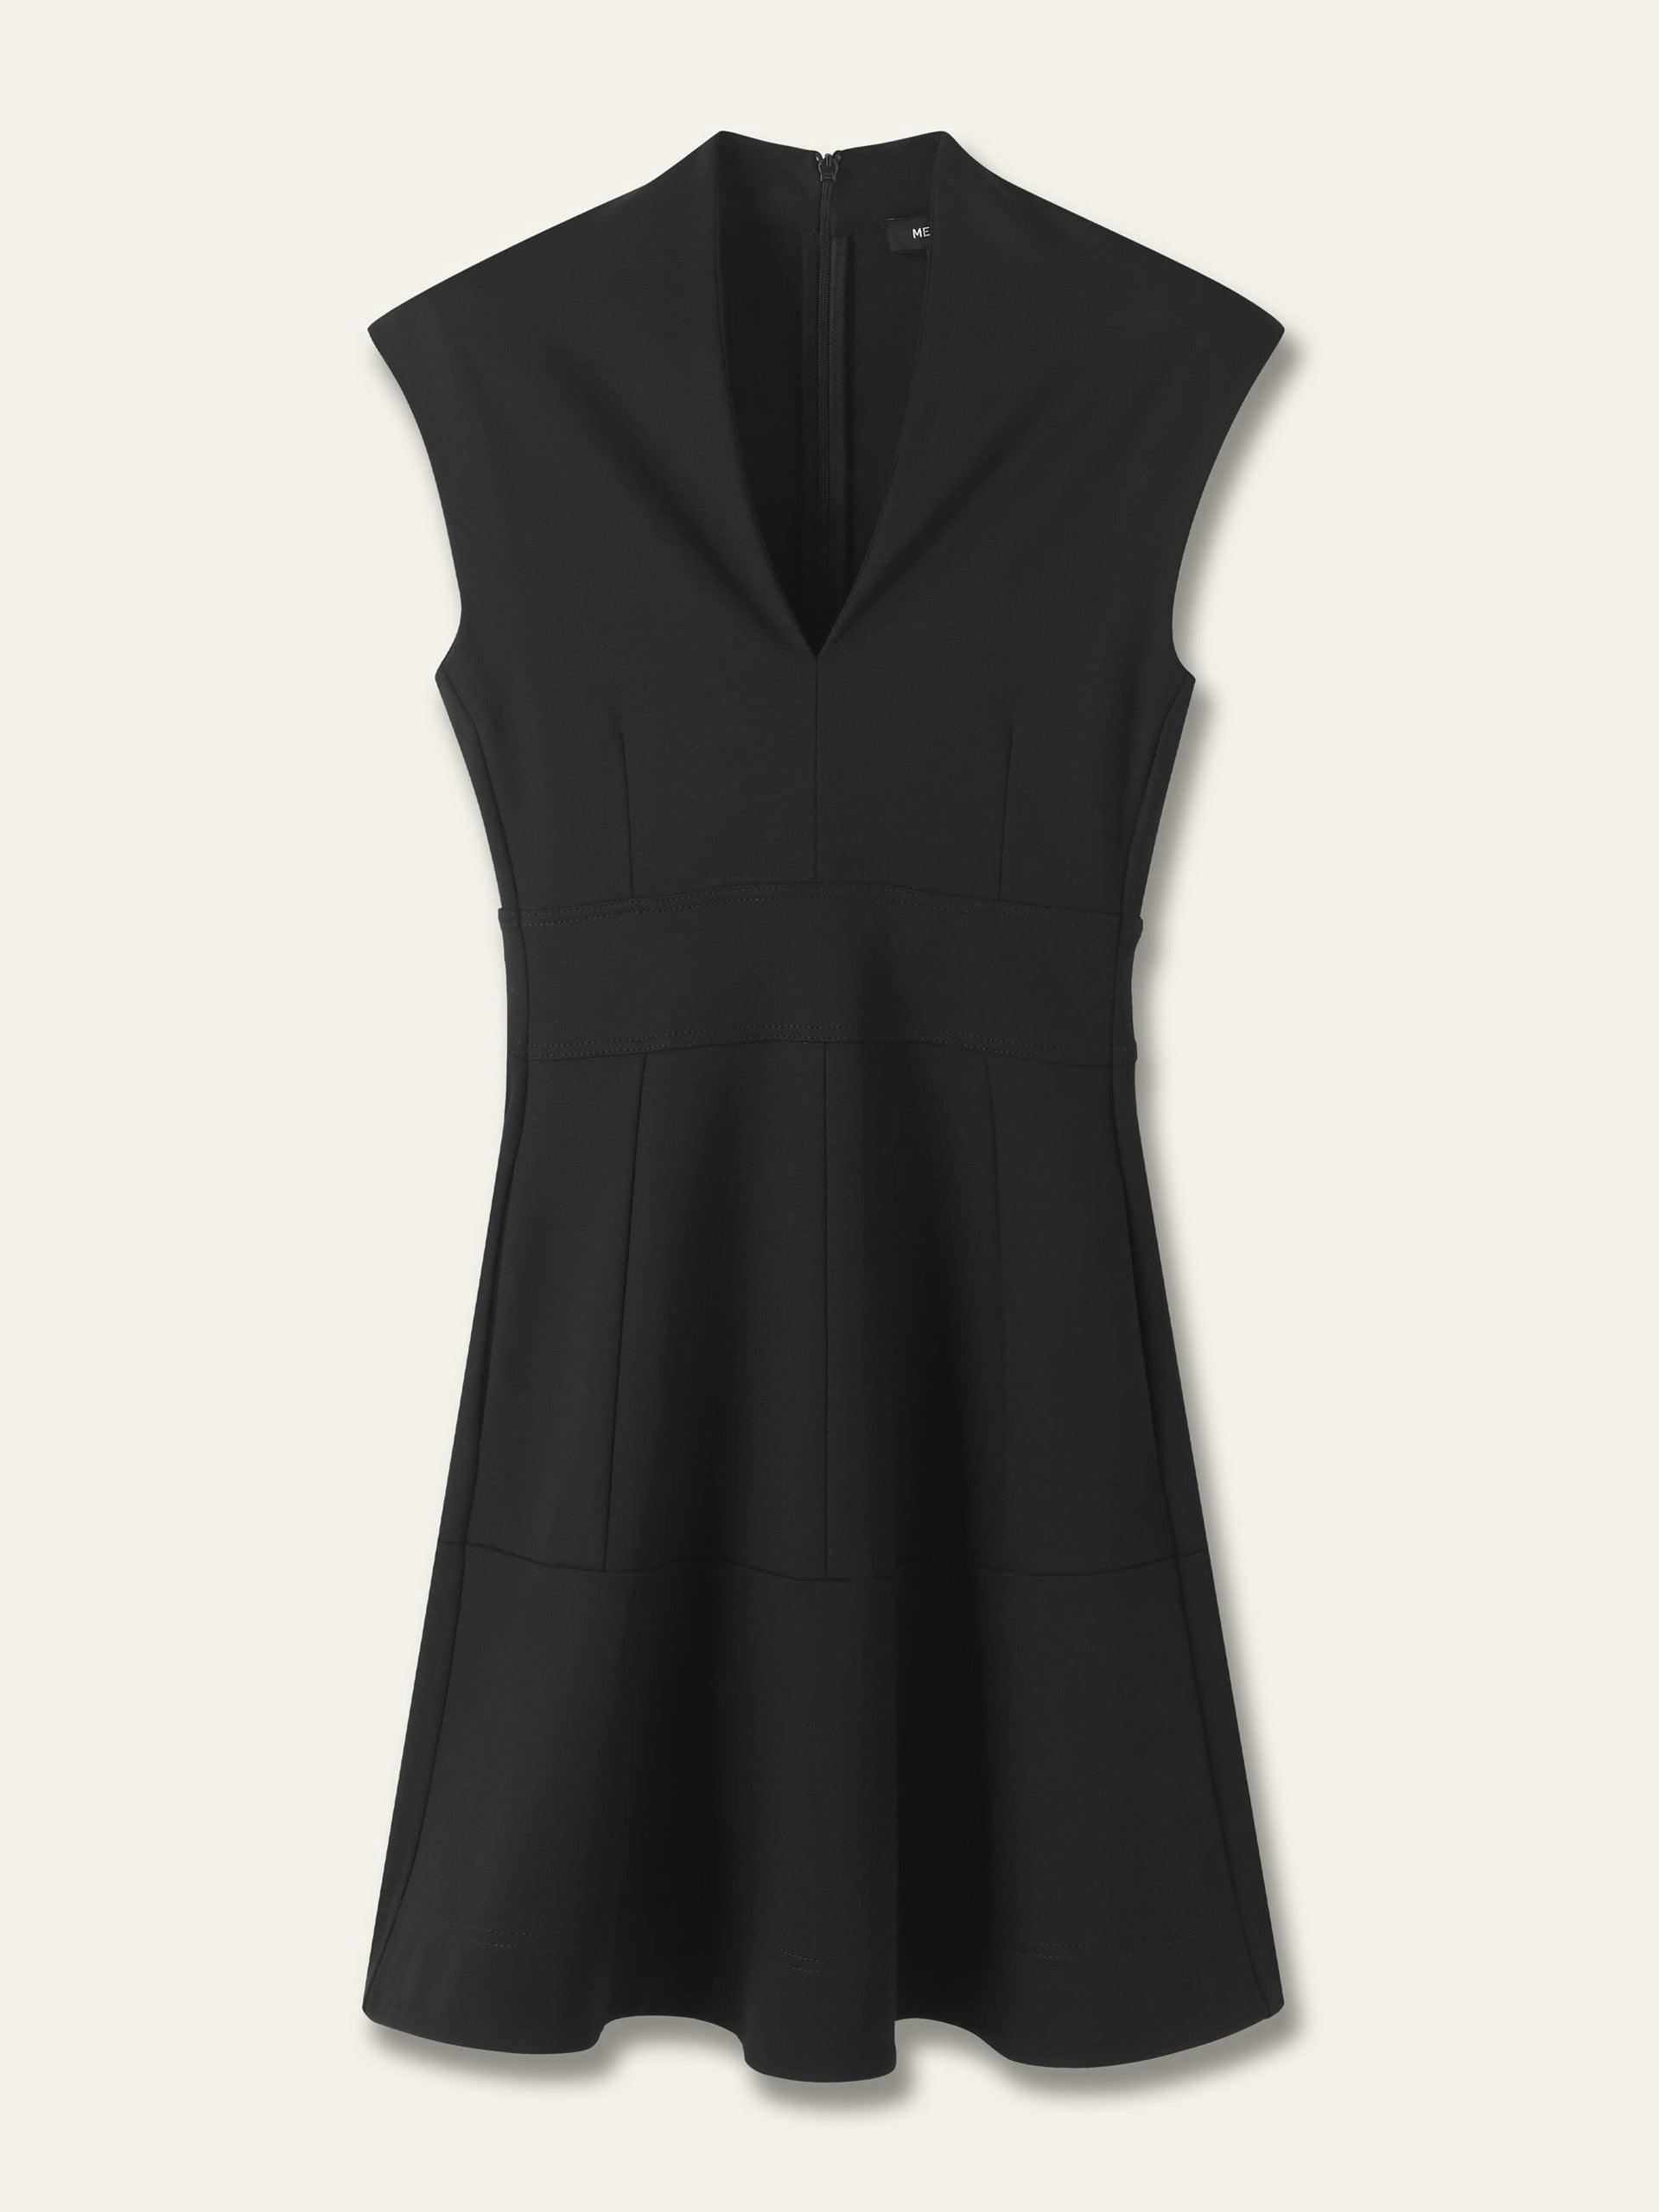 Ponte cap sleeve fit and flare dress